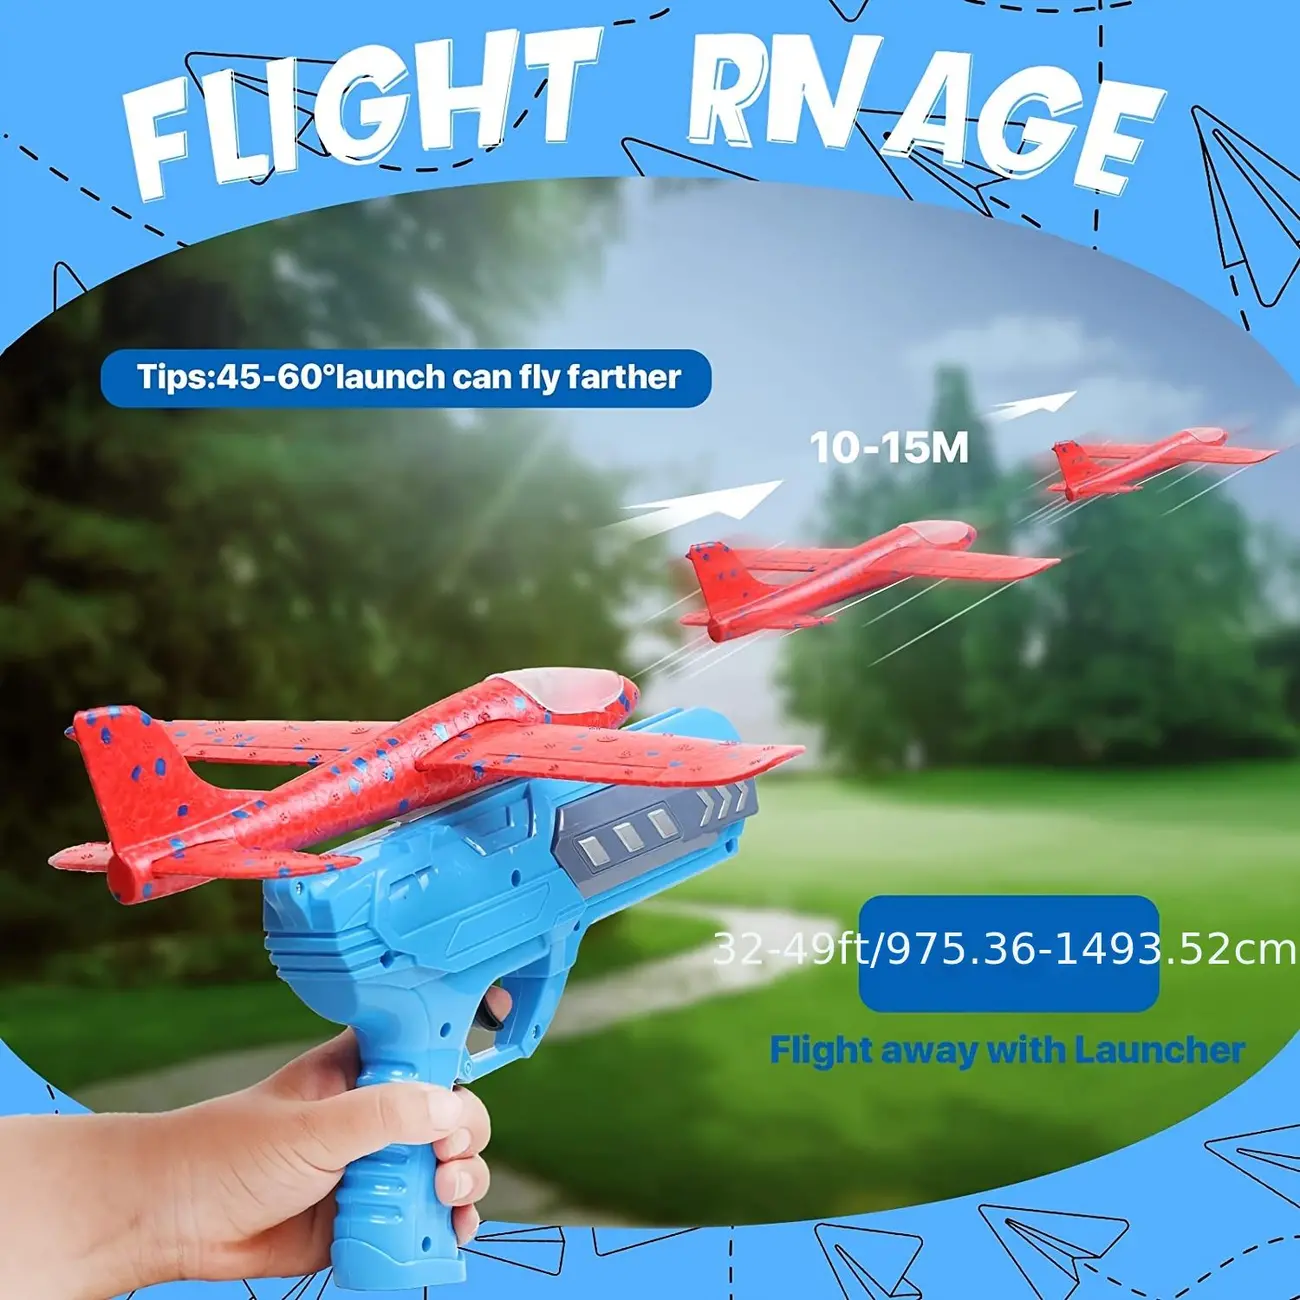 Airplane Launcher Toy, 2 Flight Mode Led Light Throwing Foam Glider Catapult Plane Toy For Kids, One-click Ejection Shooting Game For Birthday Gift For 6 7 8 9 Year Old Boys And Girls